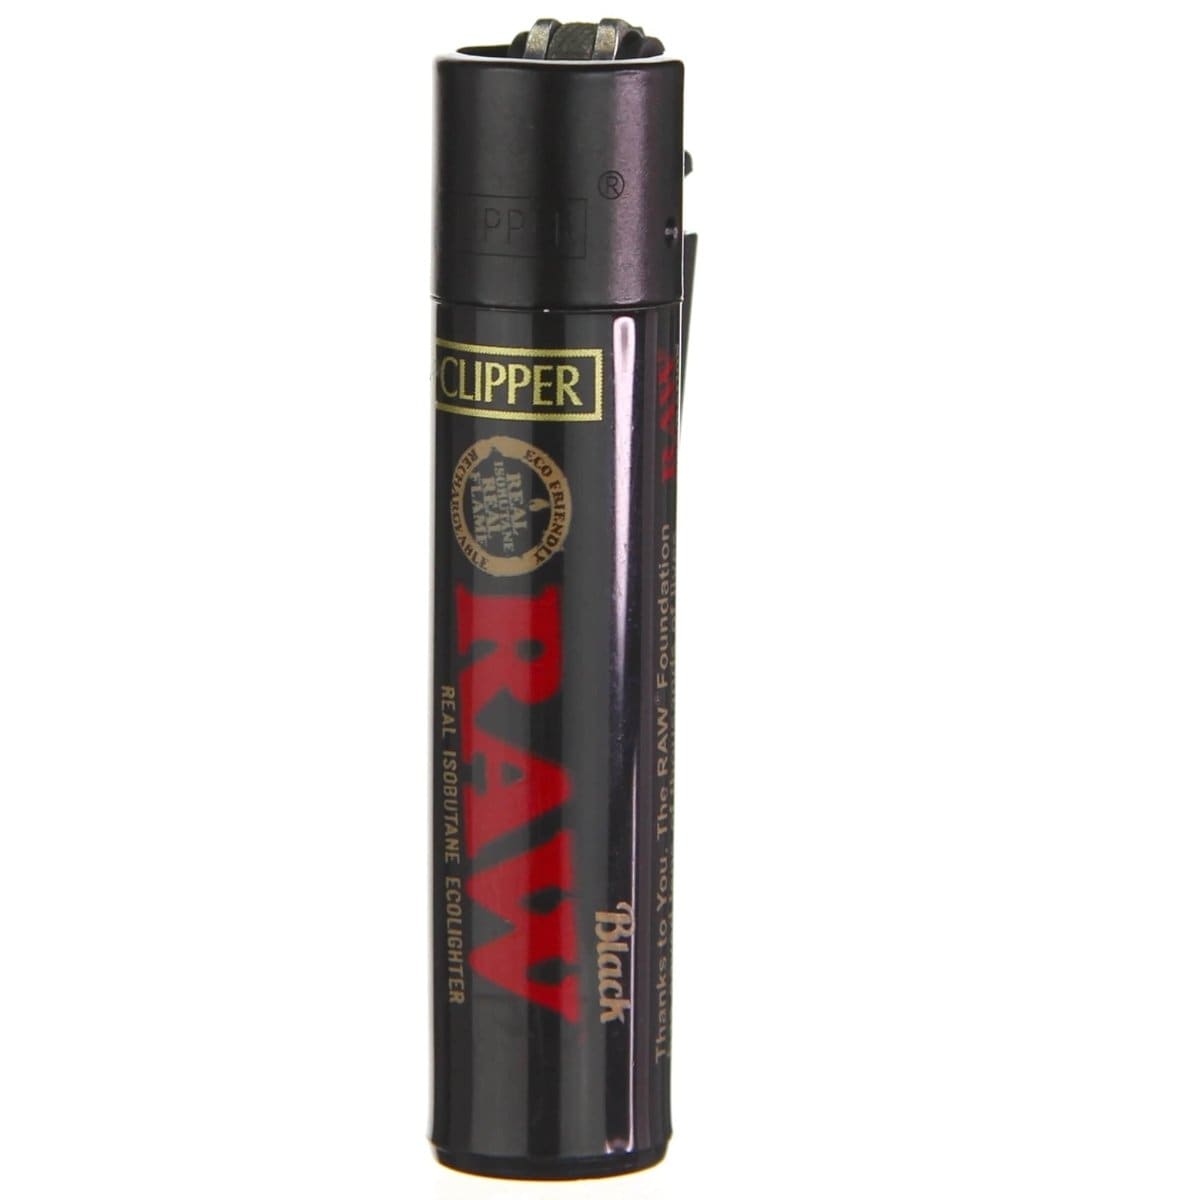 Clipper Lighter With Silicone Sleeve - Daily High Club